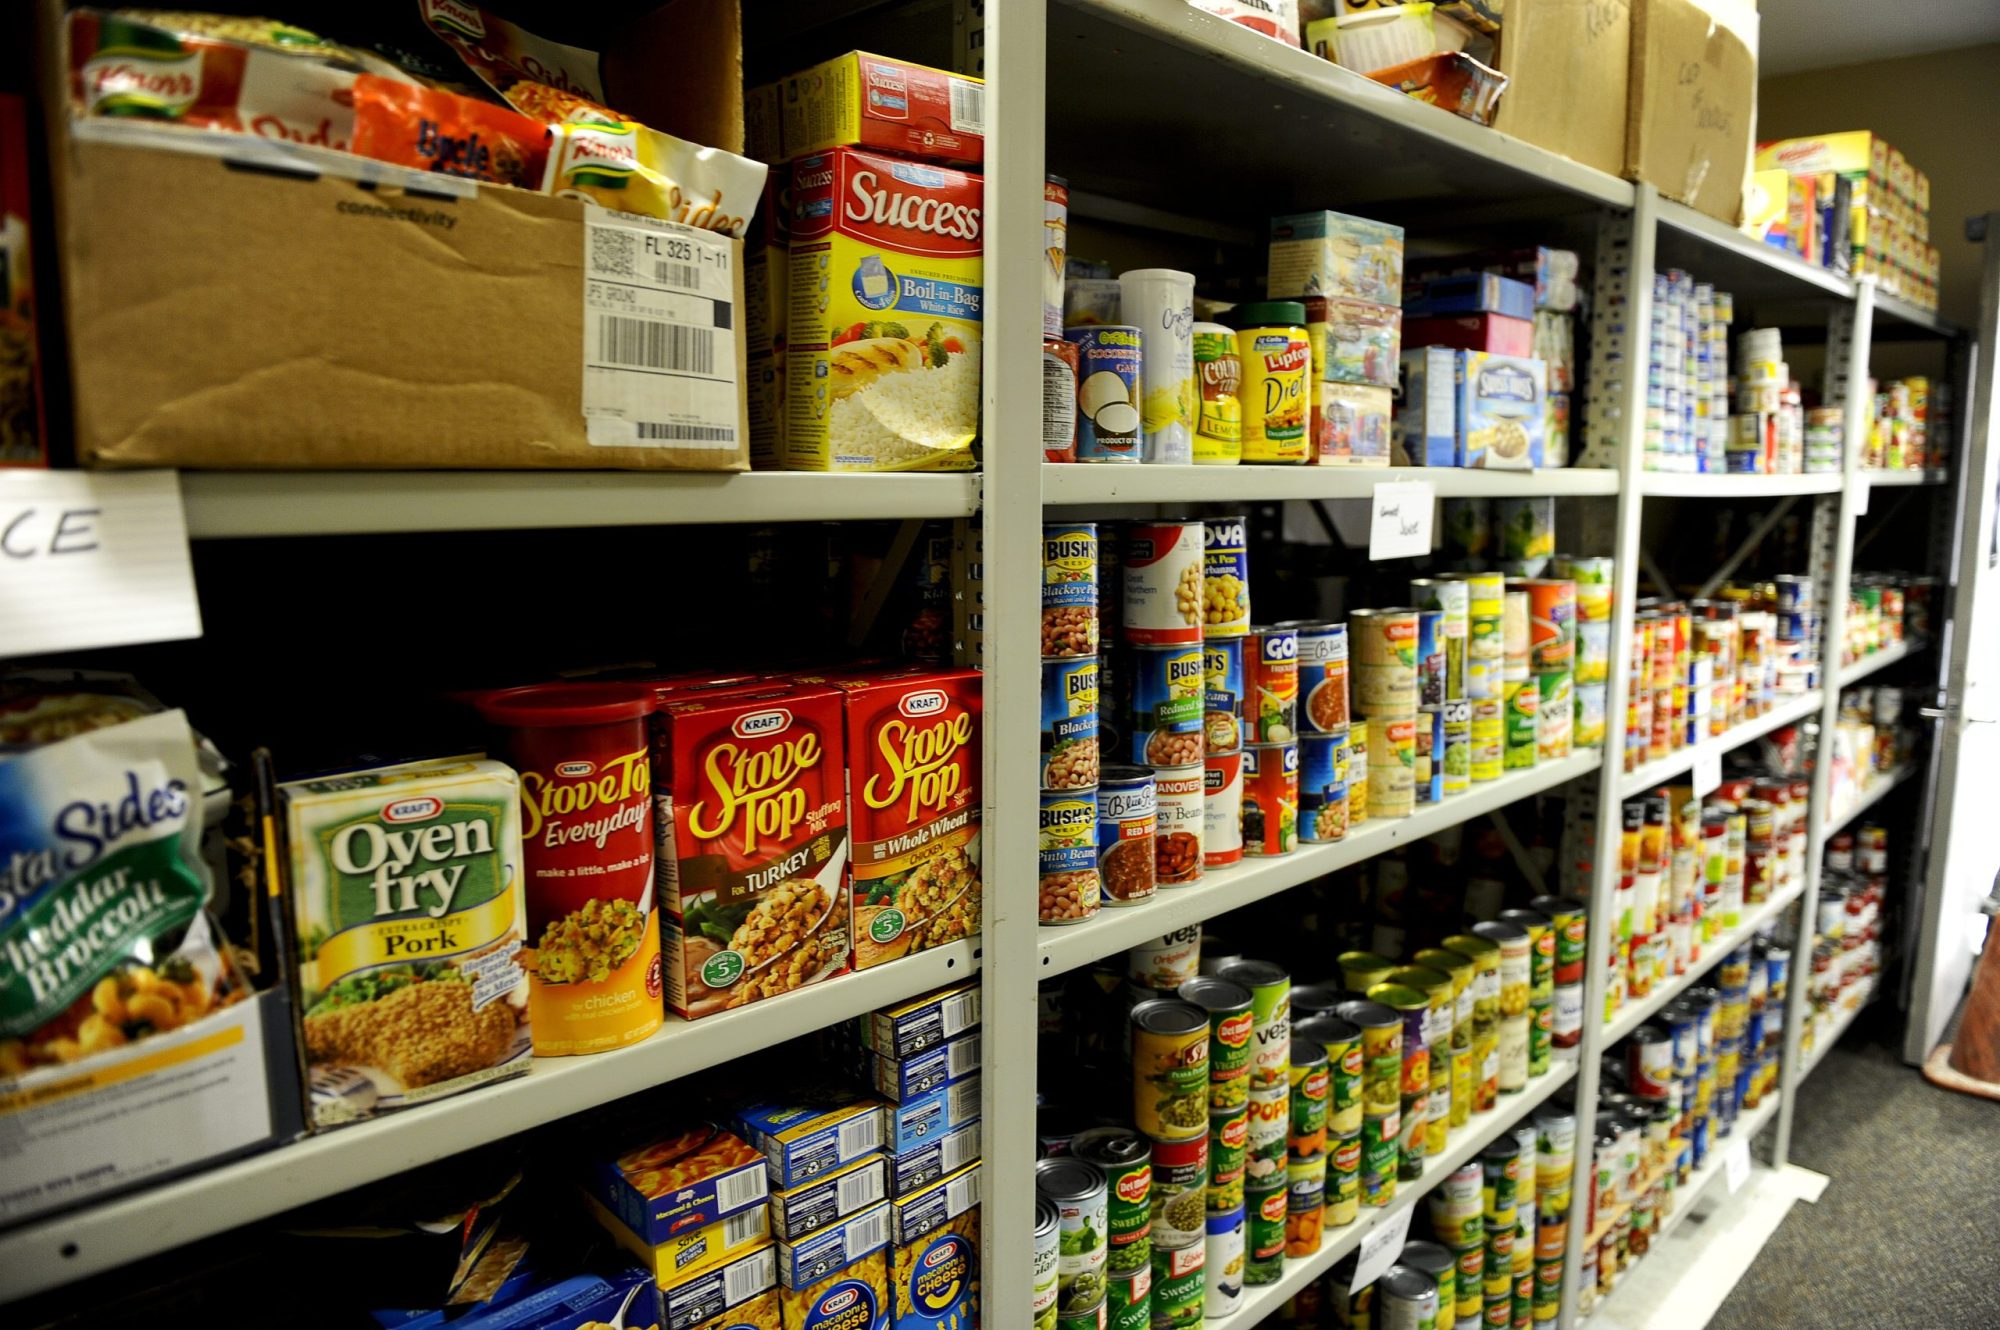 Lord’s Cupboard Food Pantry gave away more than a million pounds of food in 2020